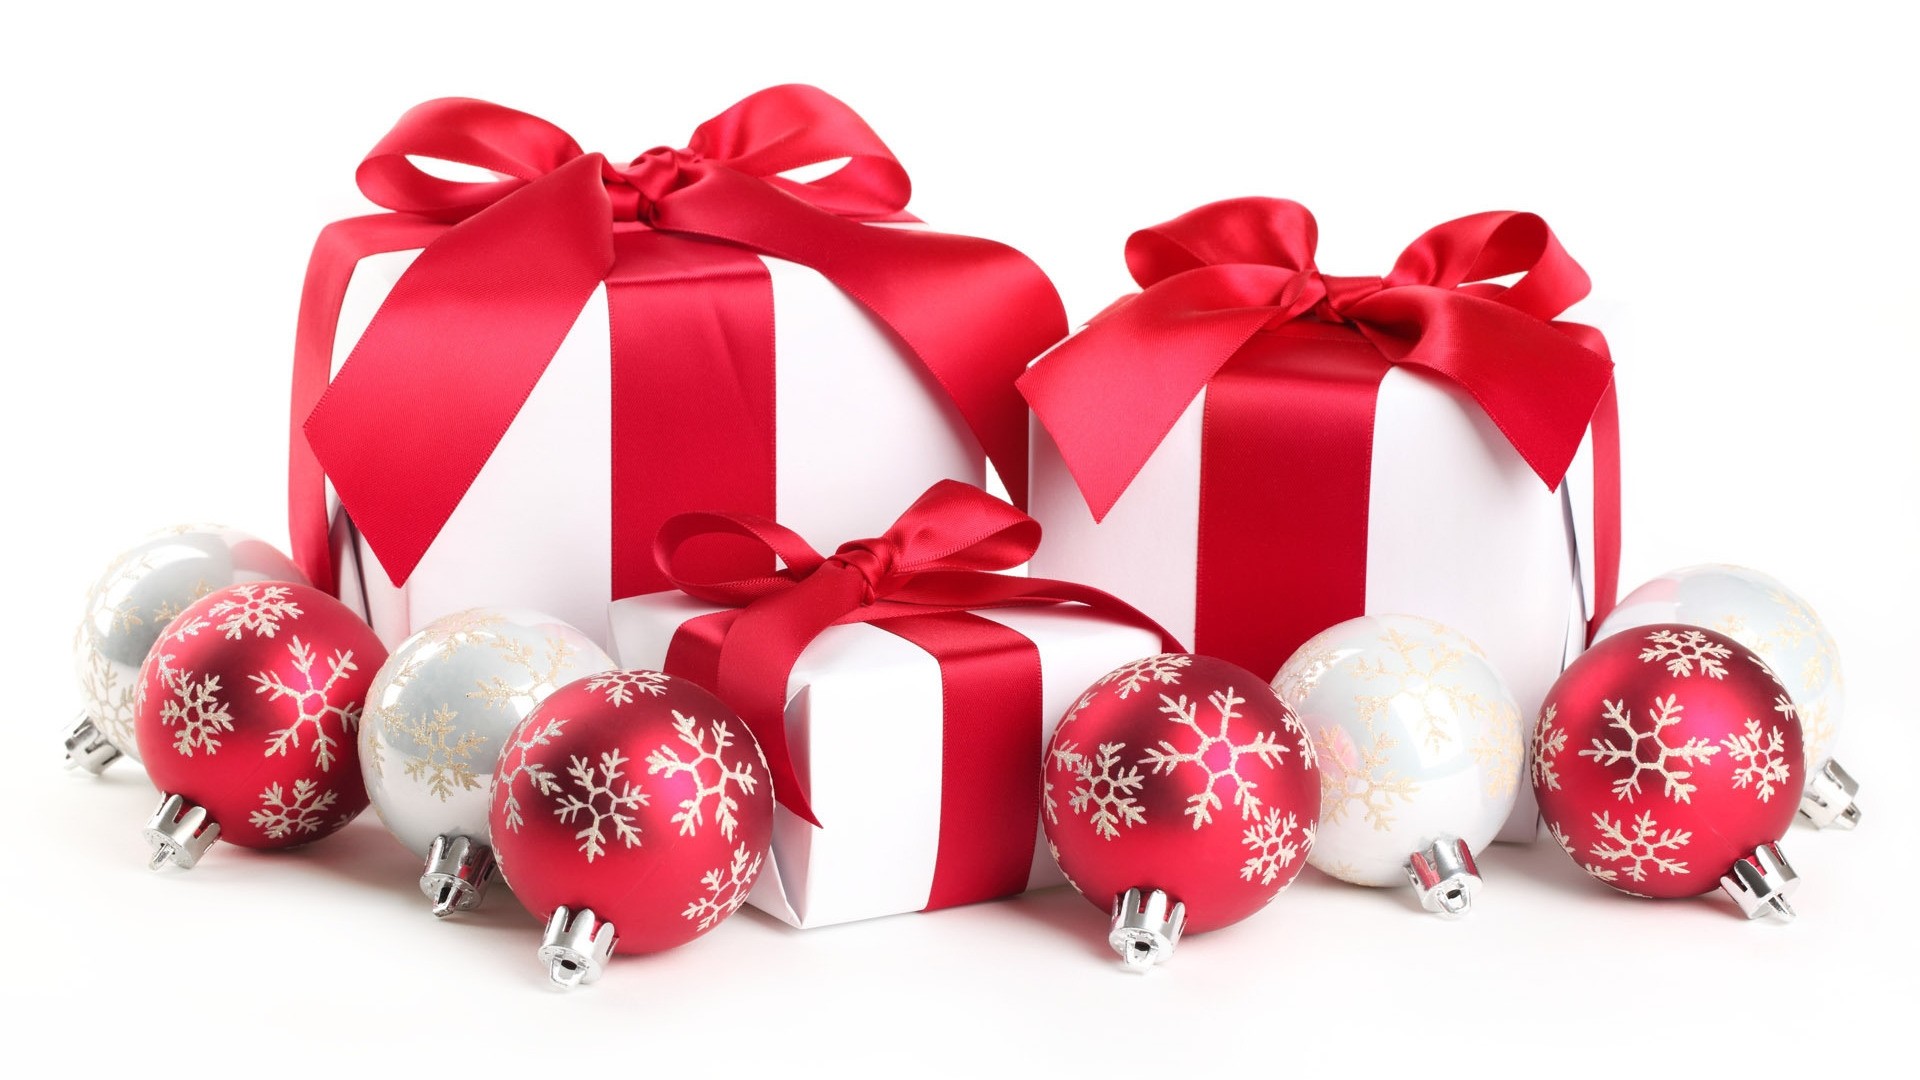 Christmas presents wallpapers and stock photos